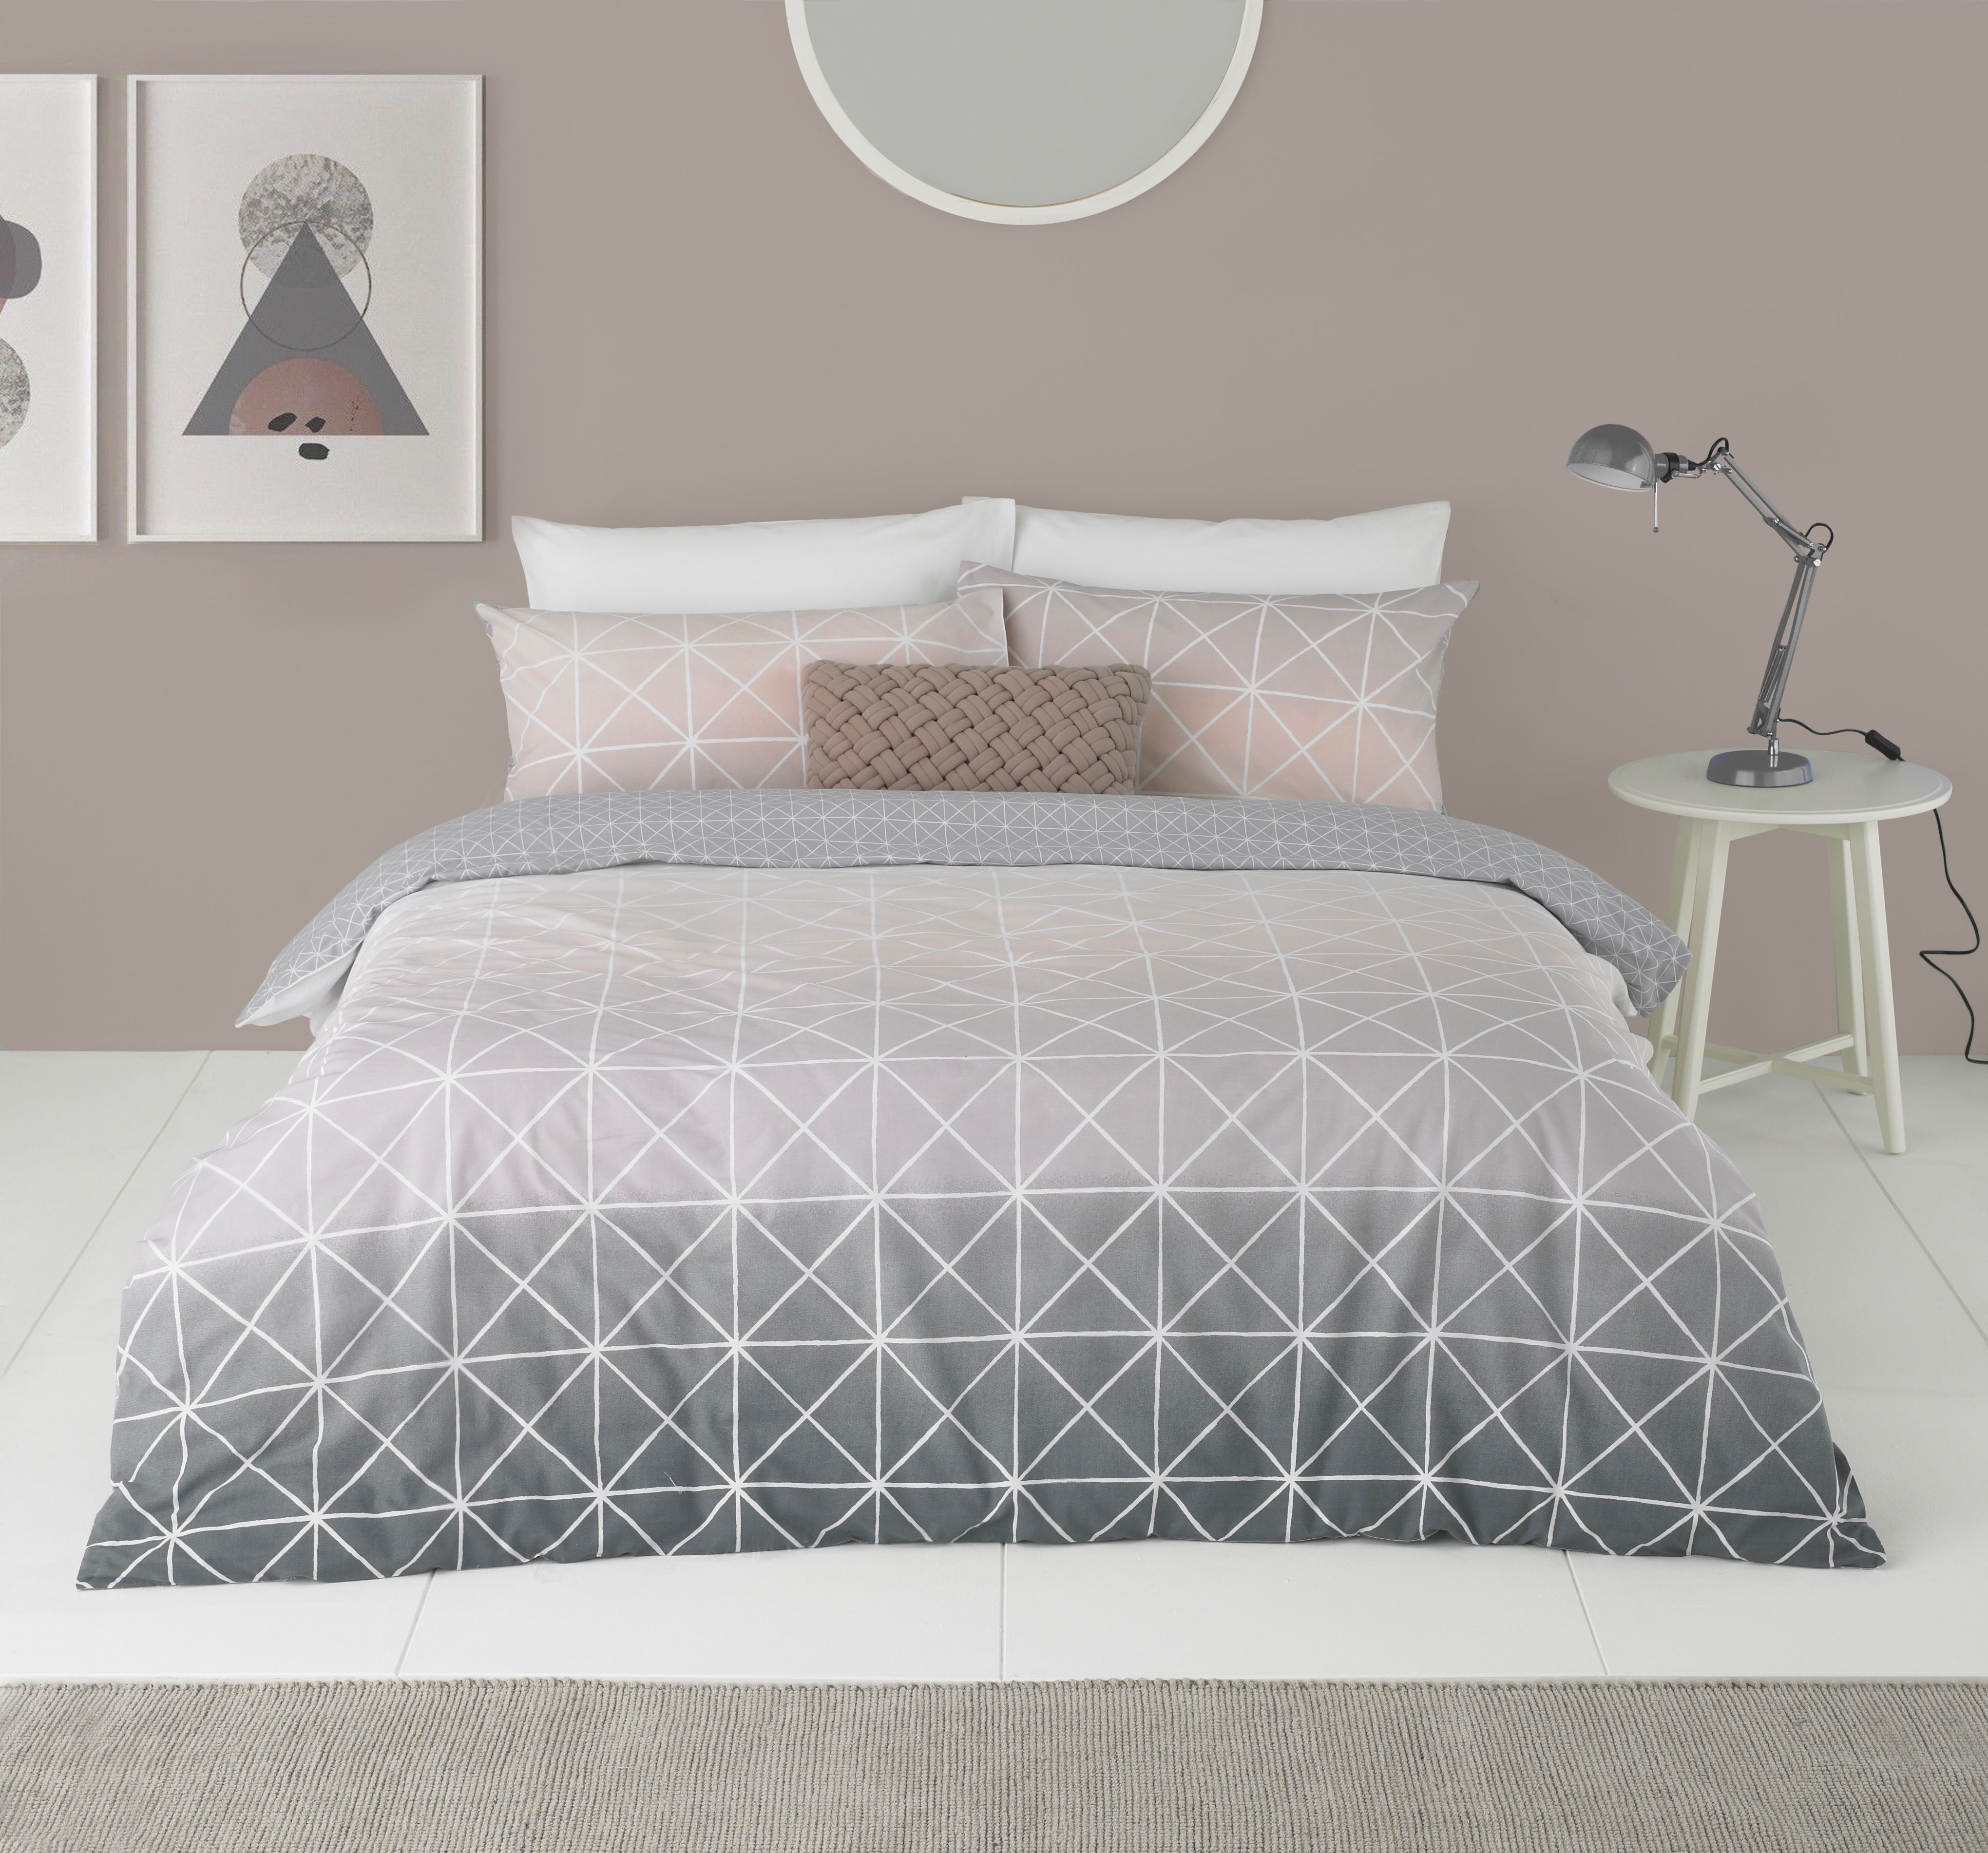 Featuring a gorgeous gradient flowing from a crisp white, to soft pink and finishing on a beautiful grey the Spectrum duvet cover set is a versatile piece. Complete with thin white lines in a geometric pattern it brings a modern touch that will elevate your bedroom into a contemporary space. The reverse has a matching plain grey with white dots to neutralise the statement front. Each duvet set comes with matching pillowcases with a reversible design. Made of crisp polycotton making this duvet set soft and hard-wearing. This duvet cover features a secure button closure while the pillowcases have an envelope closure. Machine washable on a 40 degree cycle. Iron cool and tumble dry on a low setting for the best finish.